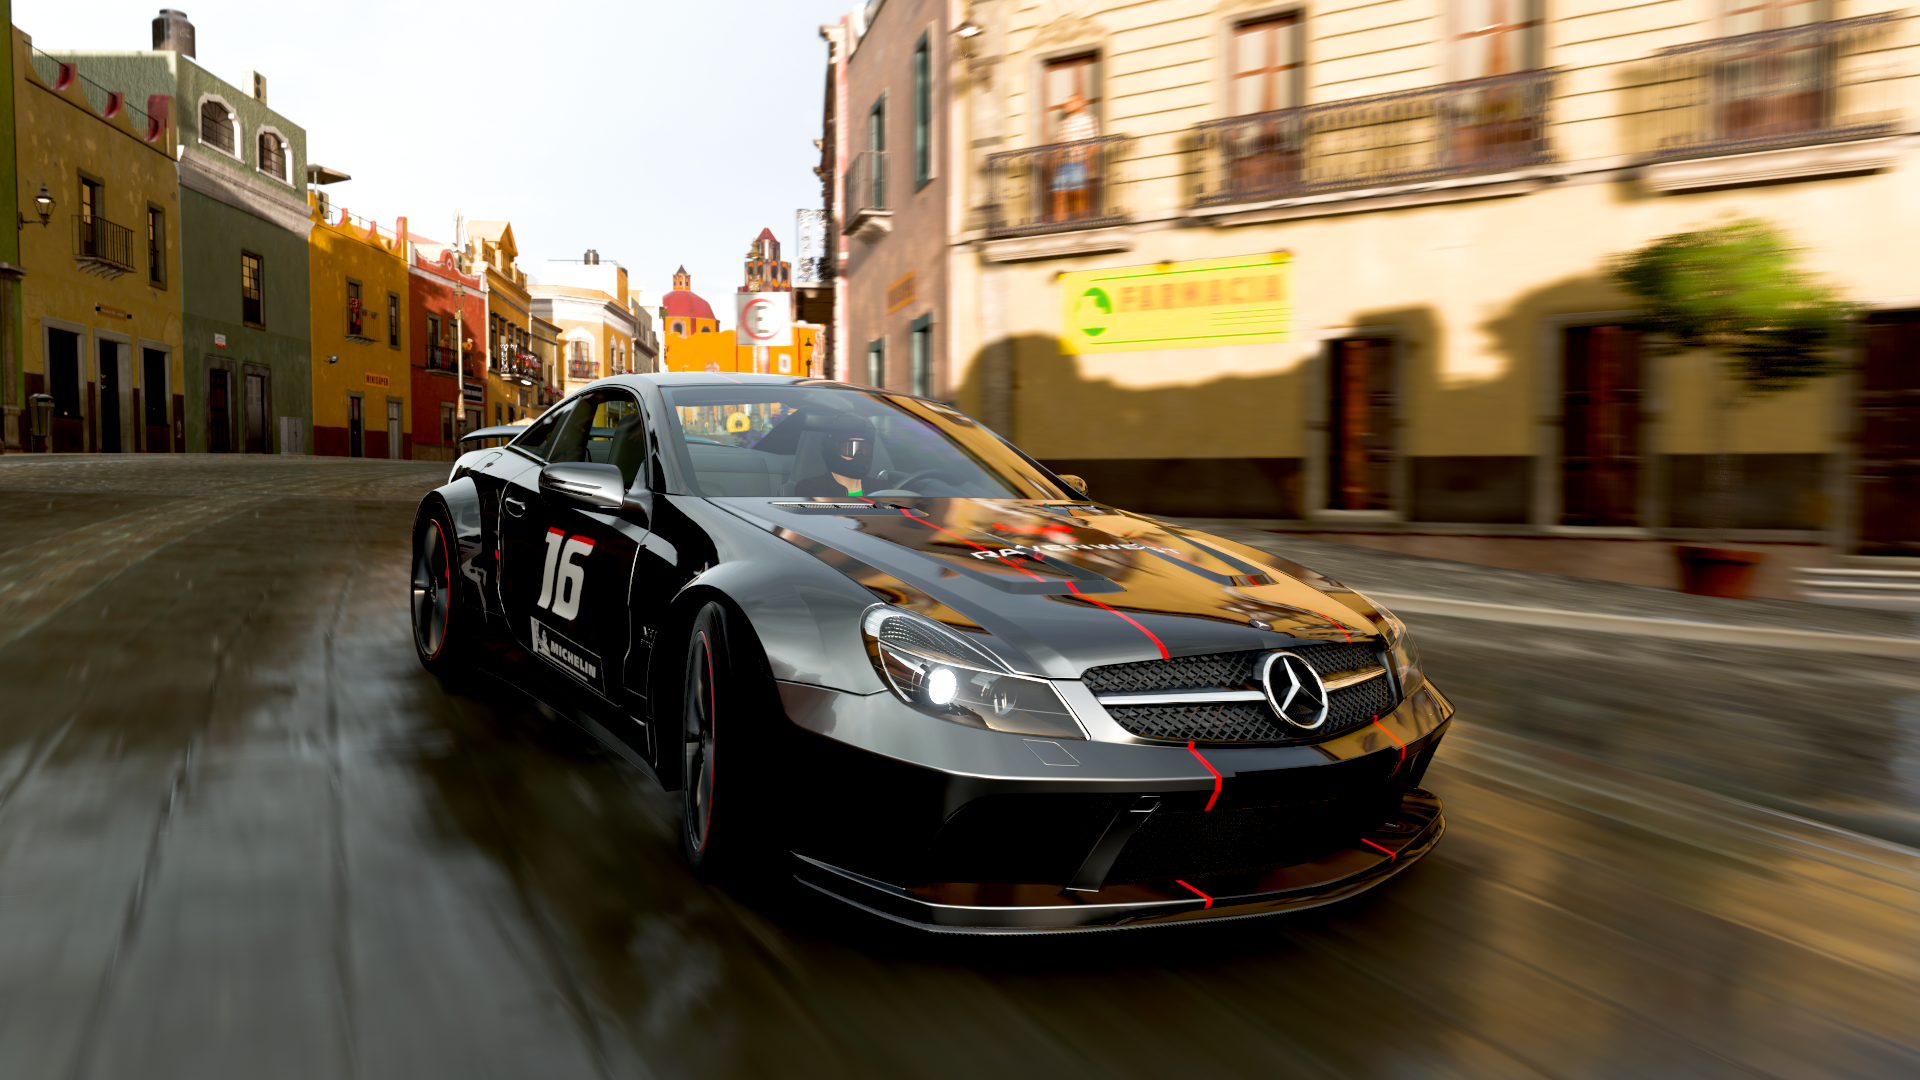 General 1920x1080 Forza Horizon 5 video games Mexico frontal view CGI building road driving headlights blurred blurry background car PlaygroundGames Mercedes-Benz German cars